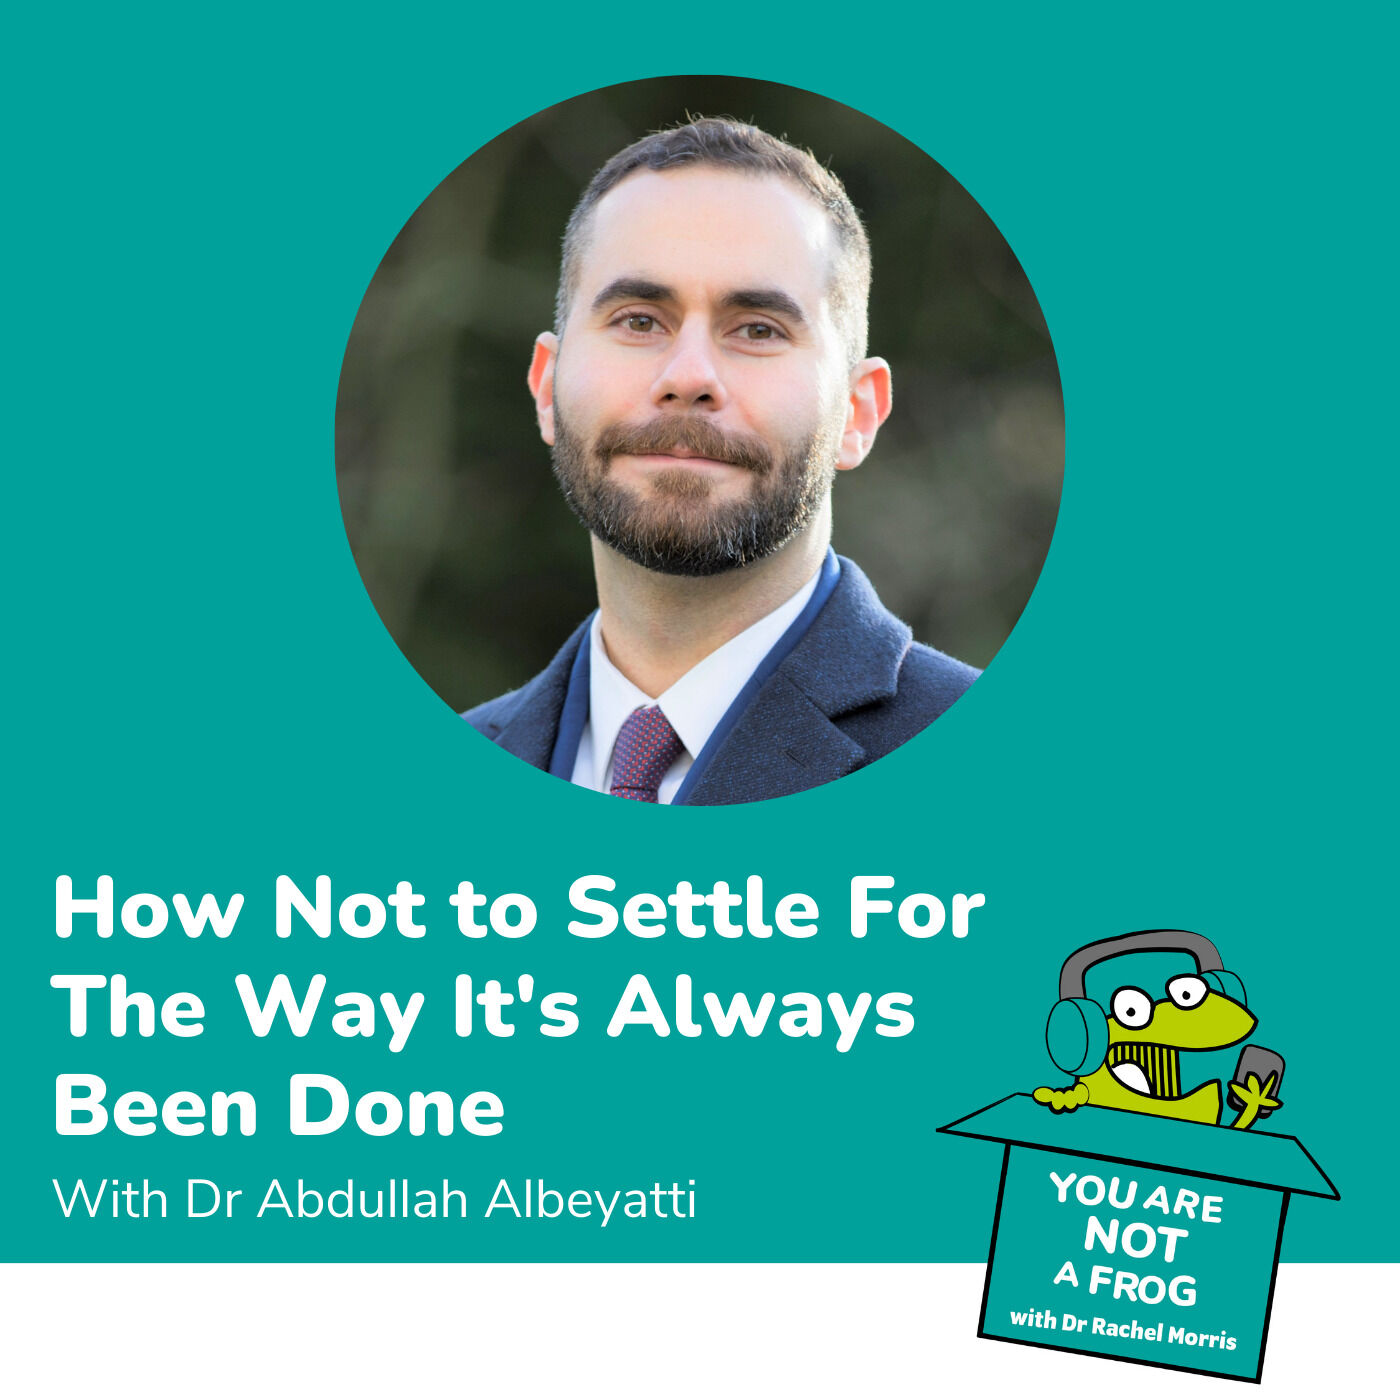 How Not to Settle for the Way it’s Always Been Done